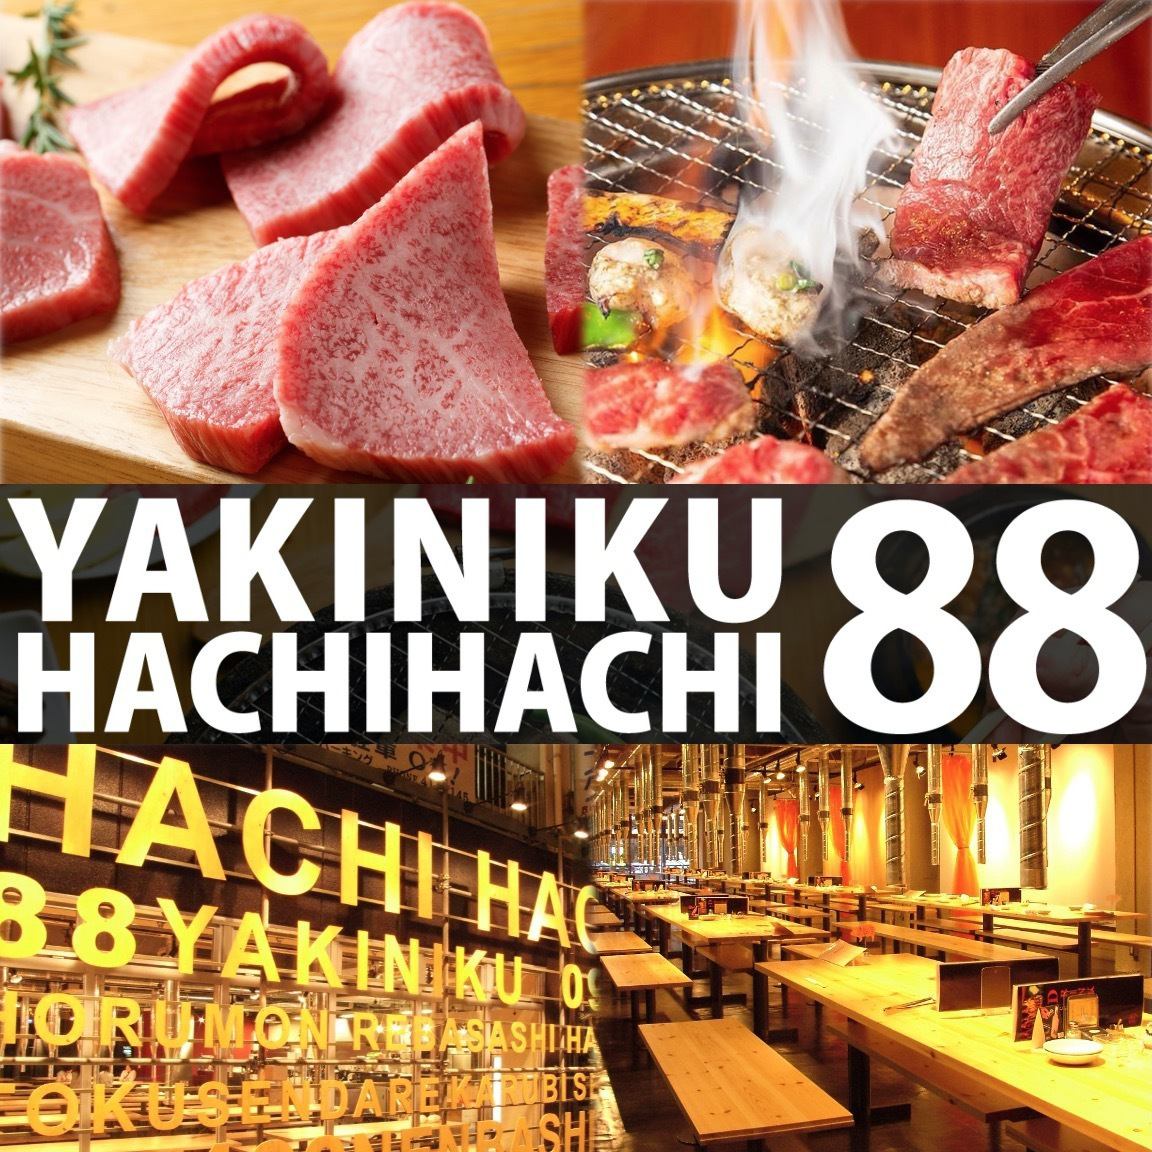 480 yen (528 yen including tax) of Kuroge Wagyu beef from Kagoshima Prefecture! Their specialty, hand-cut raw tongue, is reasonably priced and excellent!